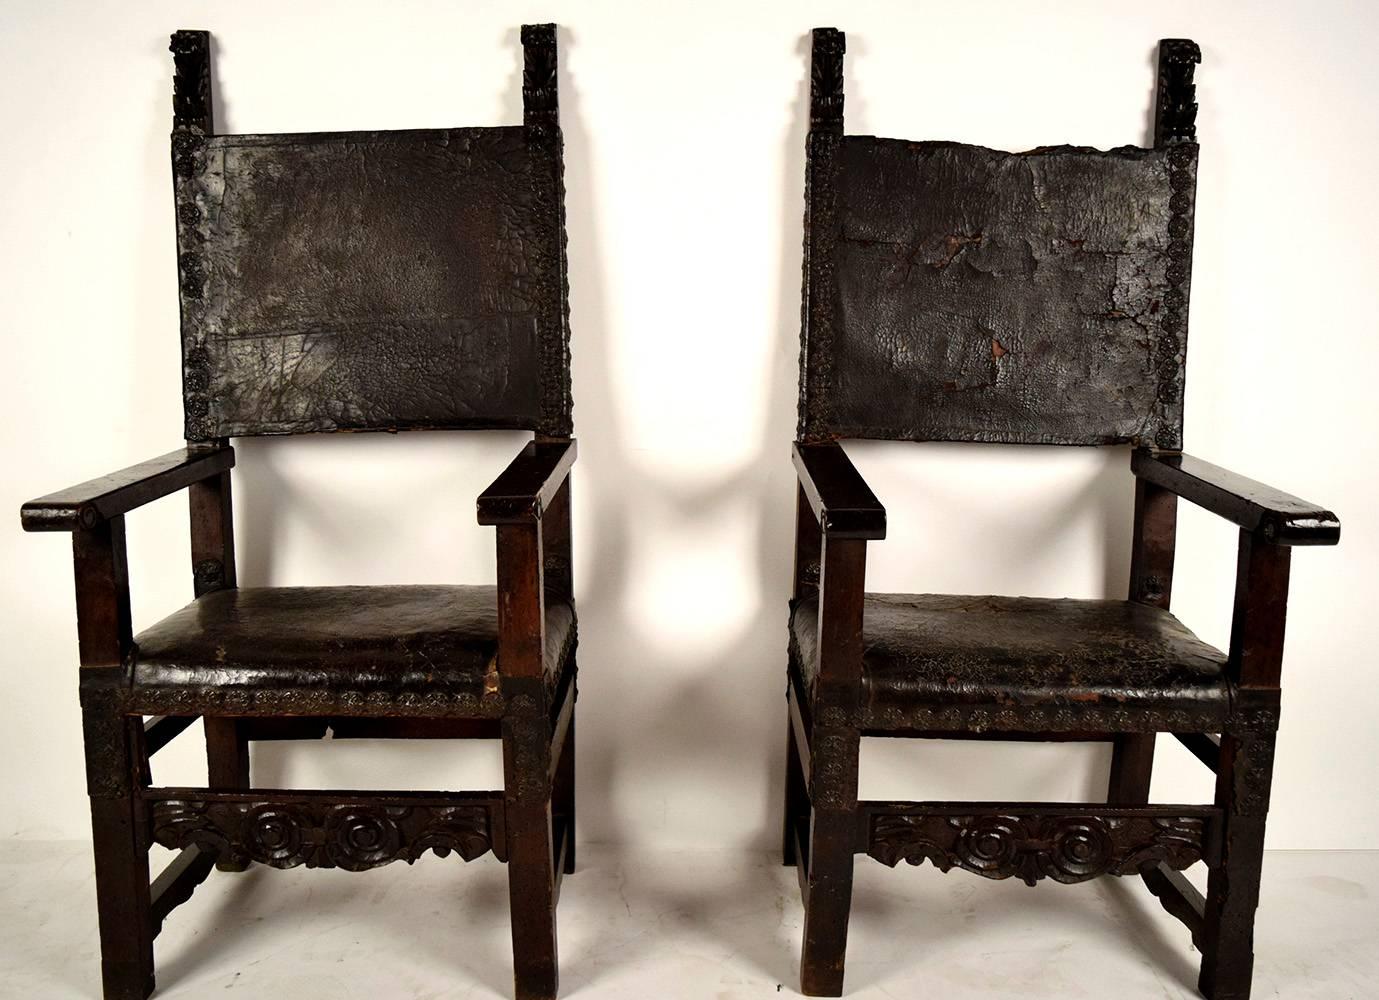 This Pair of 1750's Spanish Colonial Throne Chairs are made out of walnut wood with its original dark walnut finish and are in good condition. The seat & backrests are covered in the original leather with floral brass nailhead details and the pair